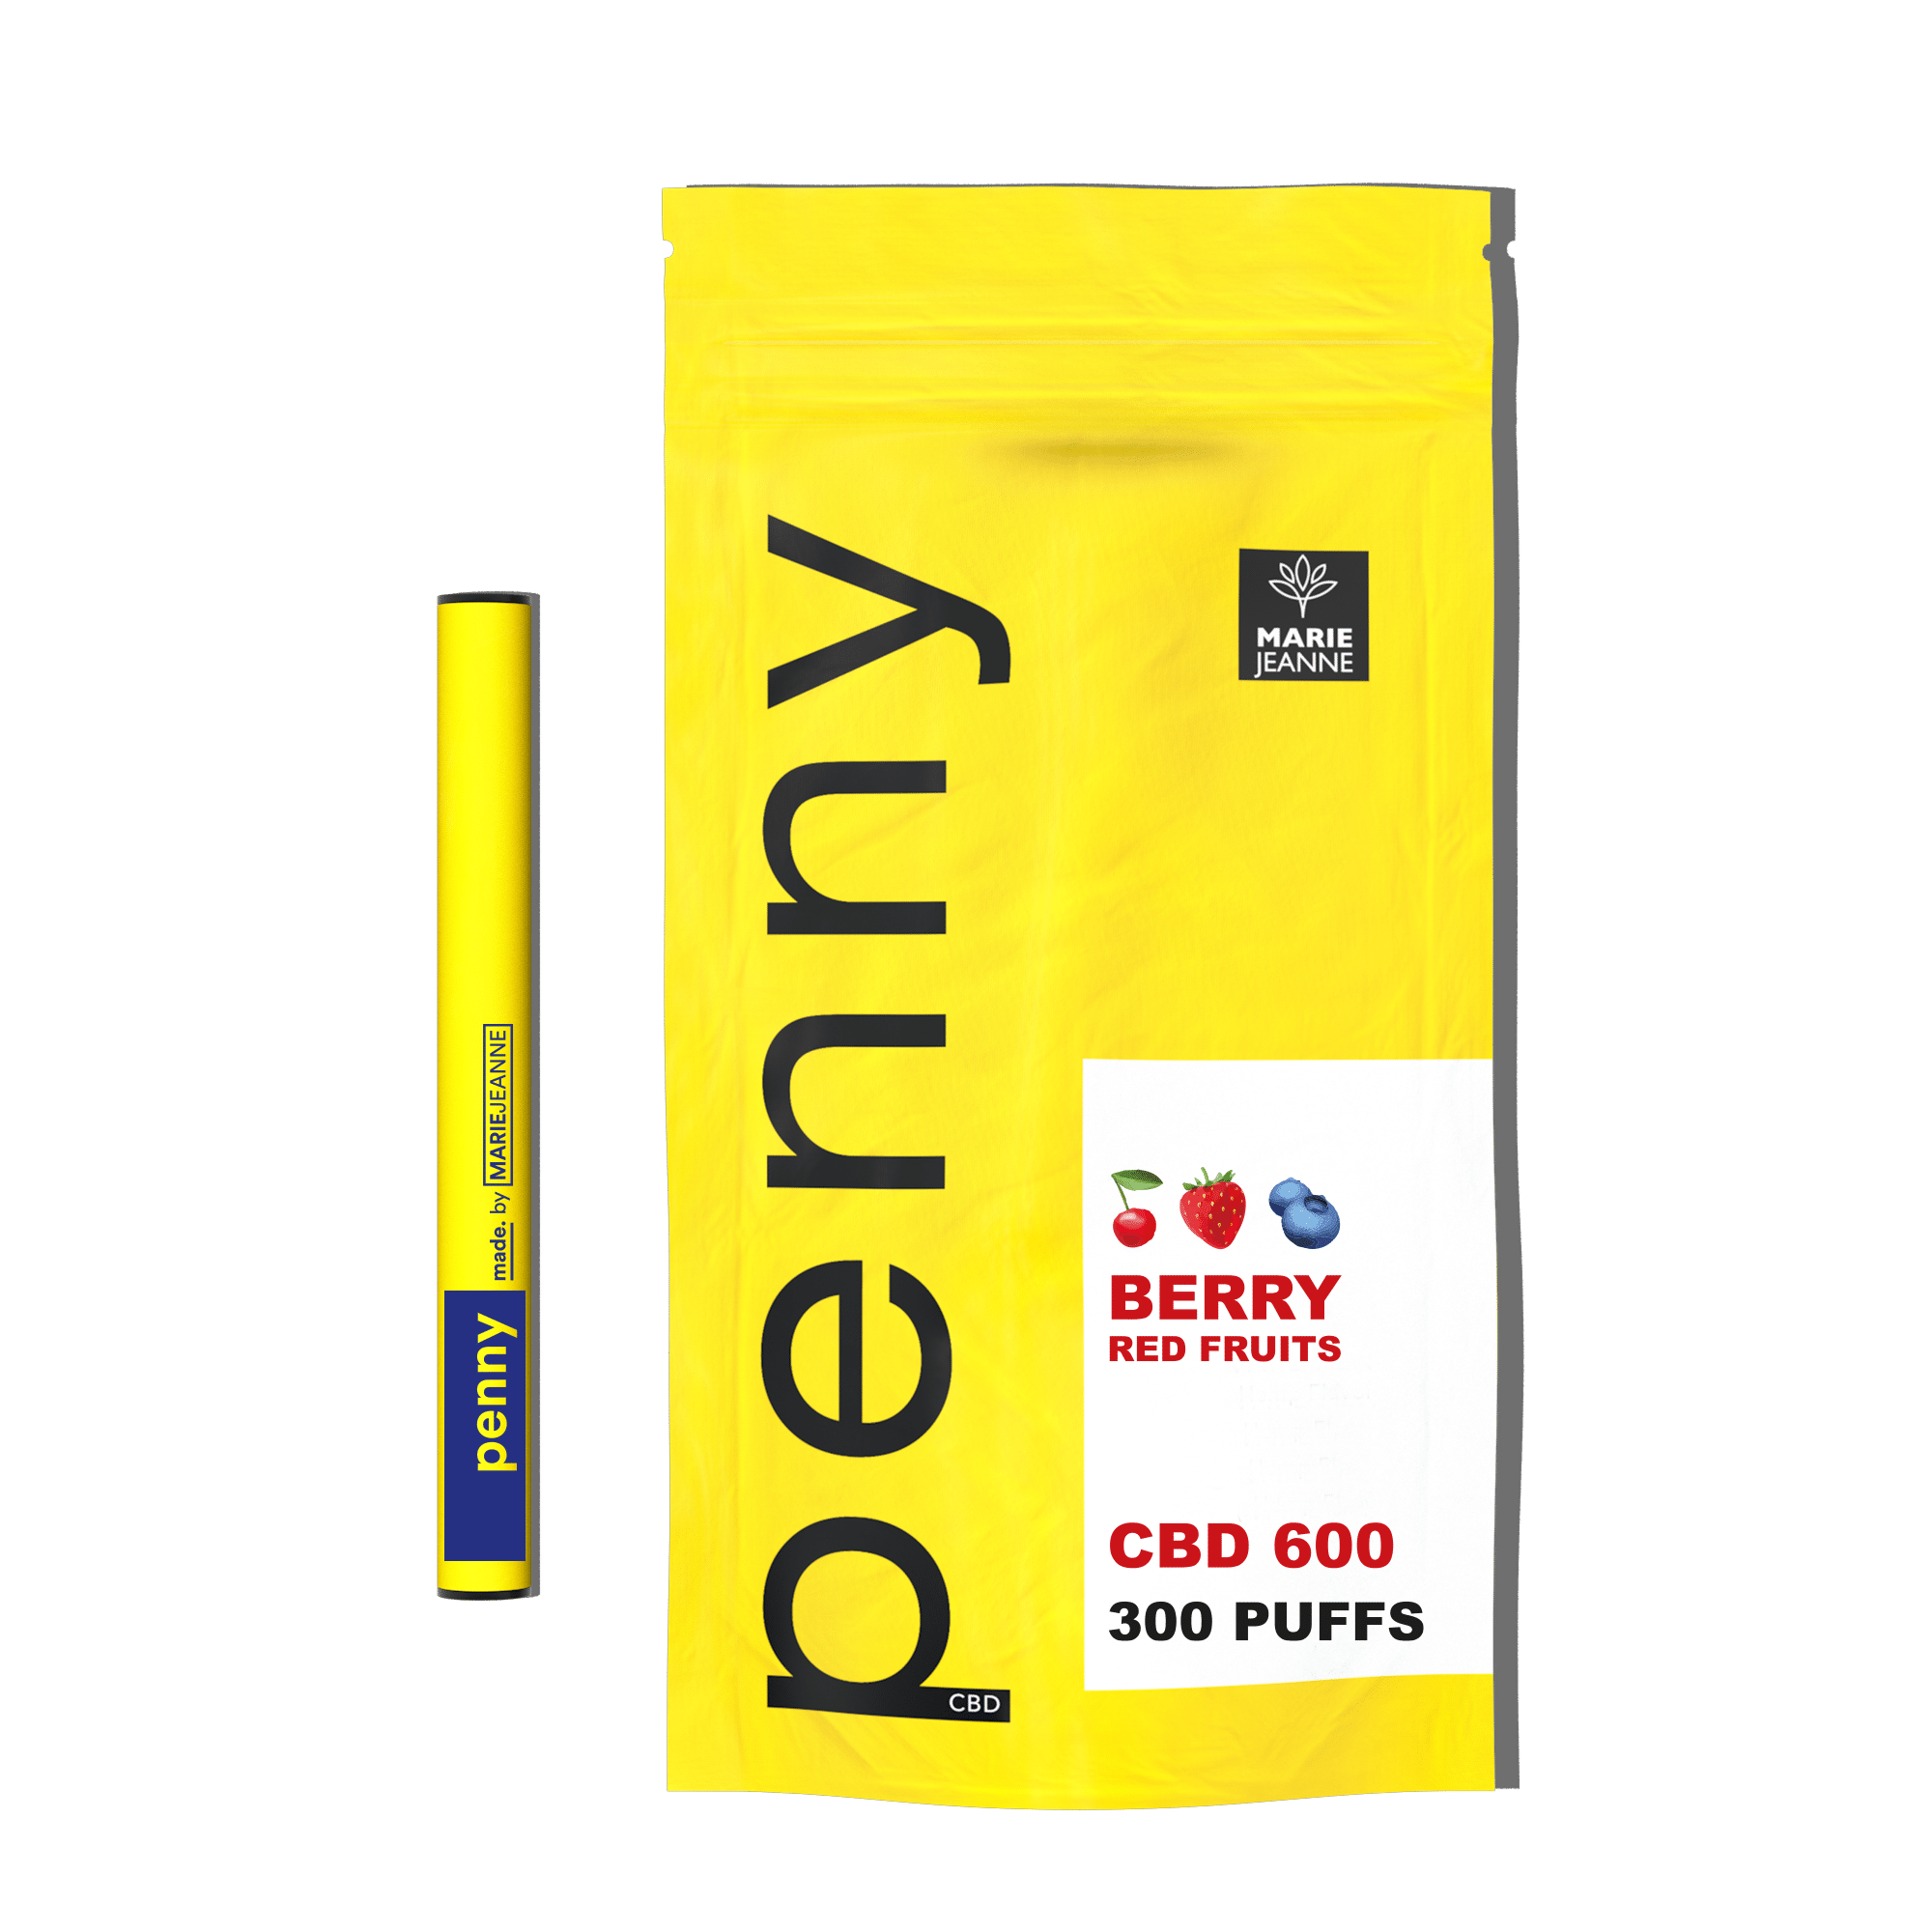 Marie Jeanne Penny Berry - Puff CBD Saveur Fruits Rouges, Marie Jeanne